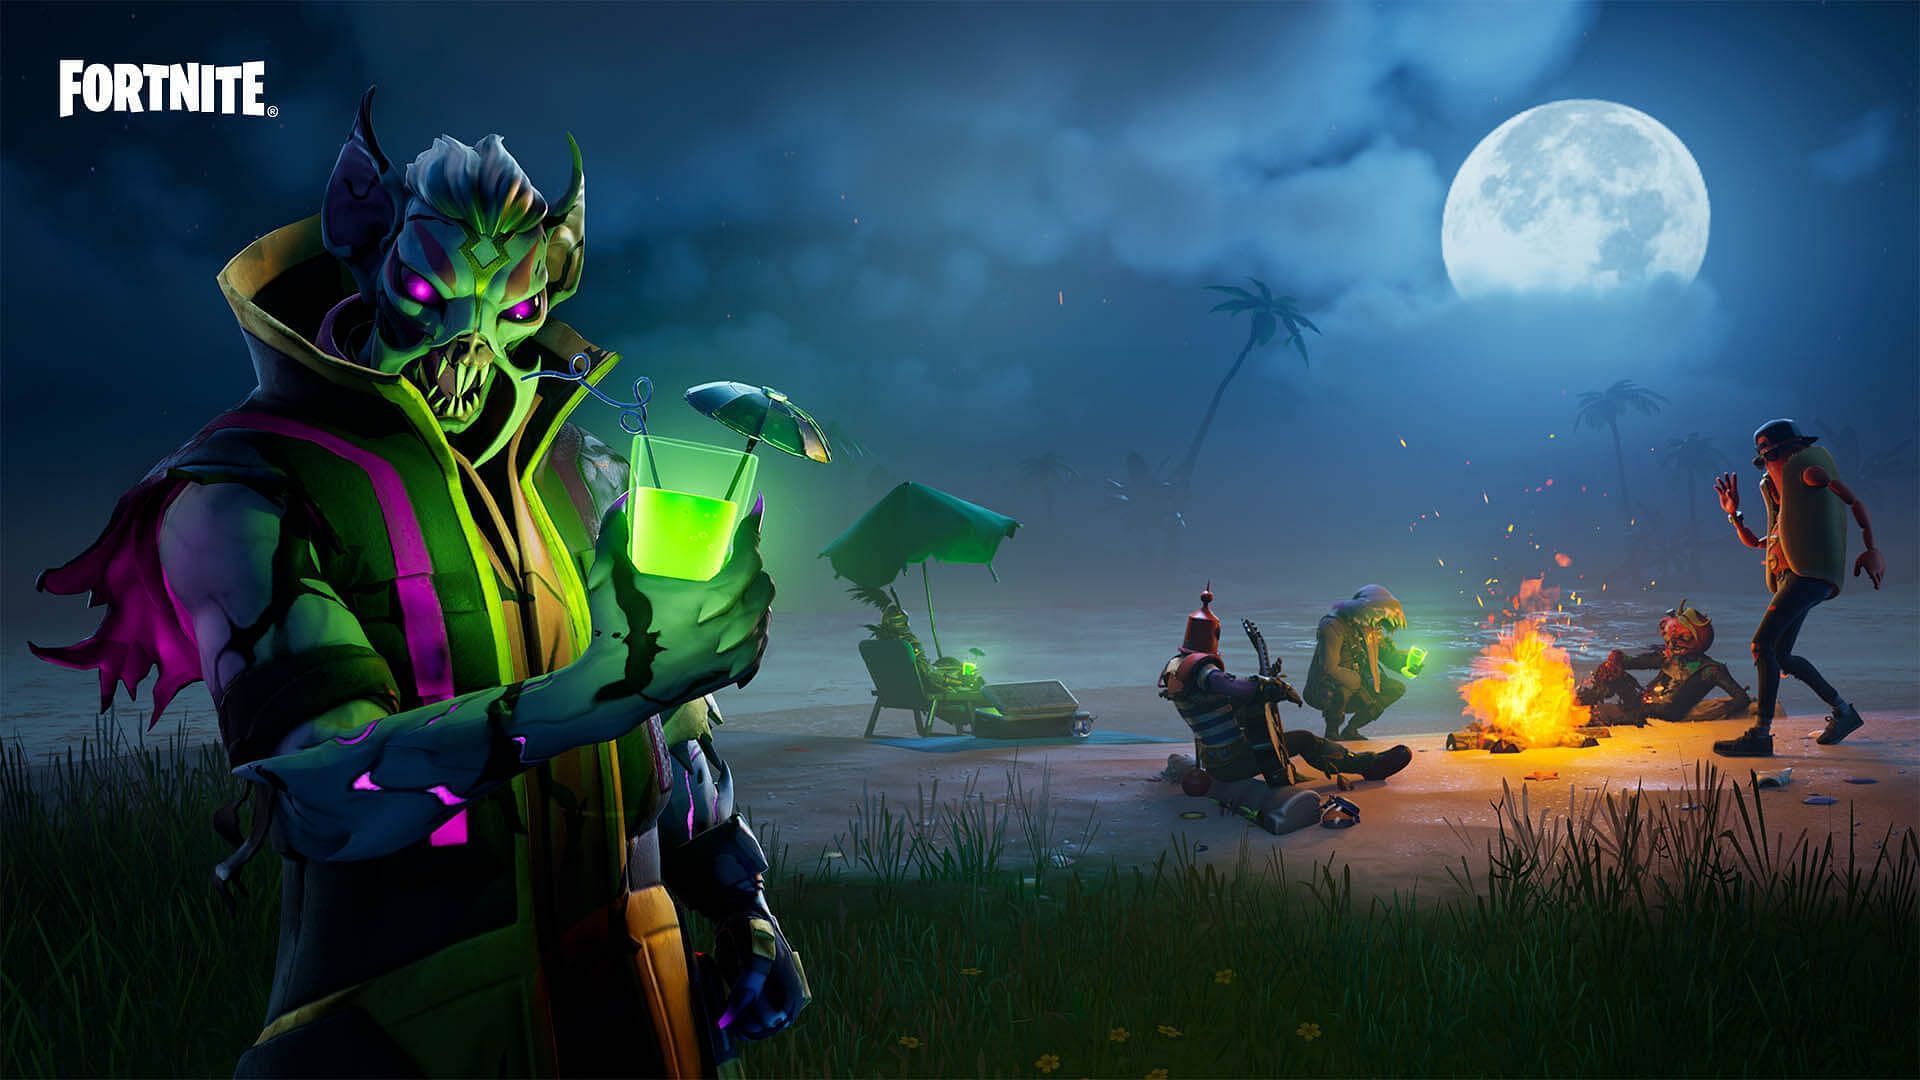 Fortnitemares 2022 will be released to Fortnite Battle Royale during Chapter 3 Season 4 (Image via Epic Games)